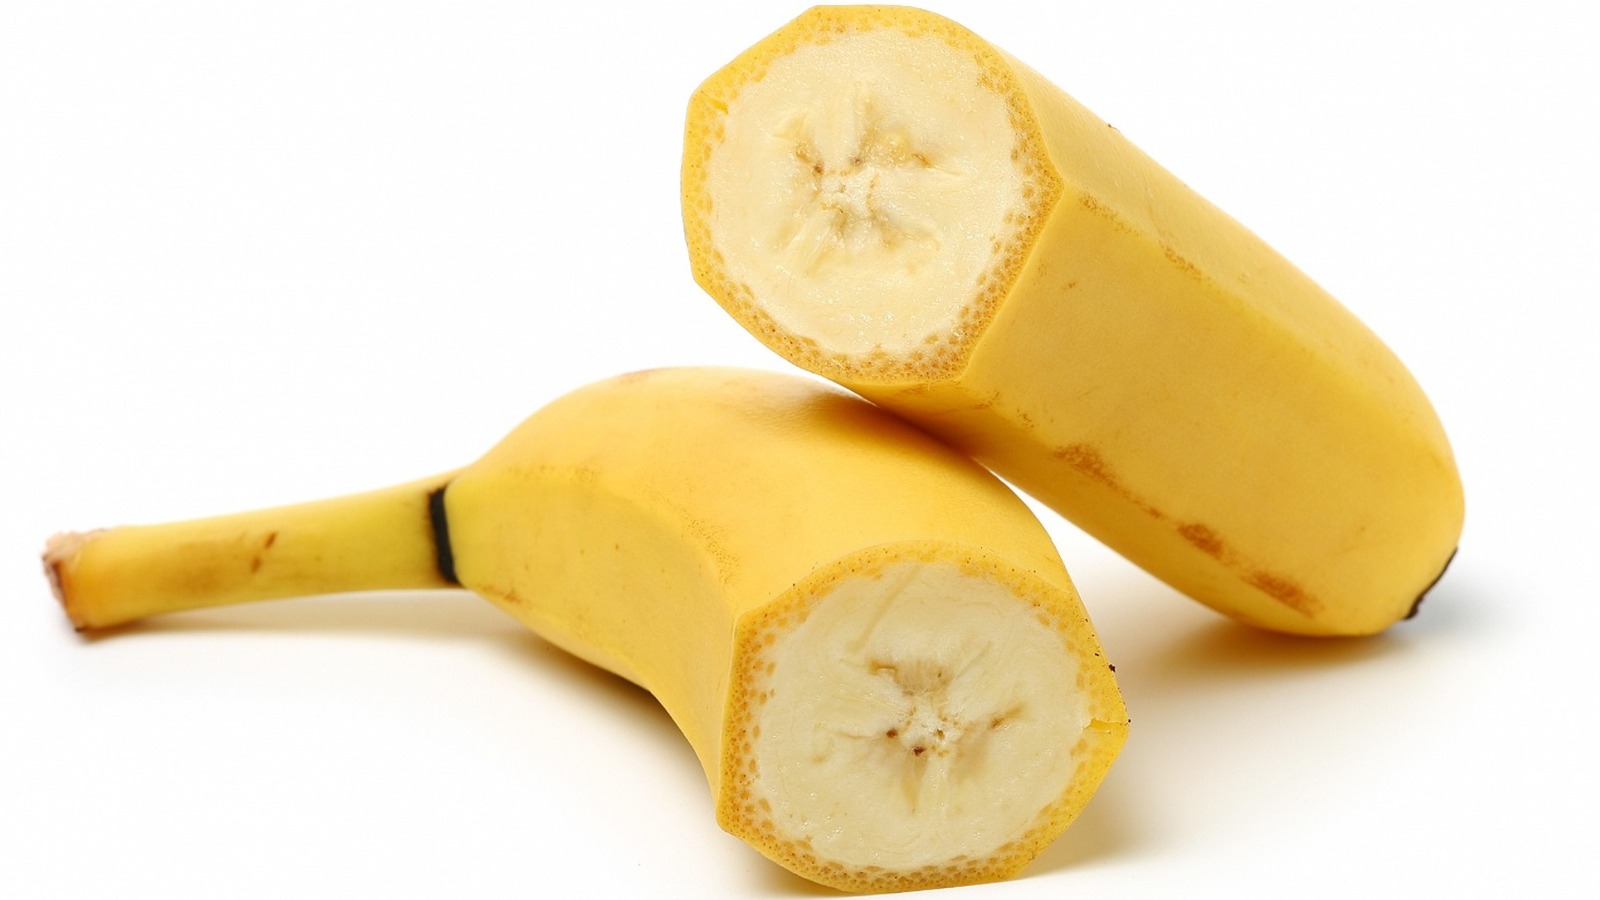 how-to-cut-a-banana-without-peeling-it